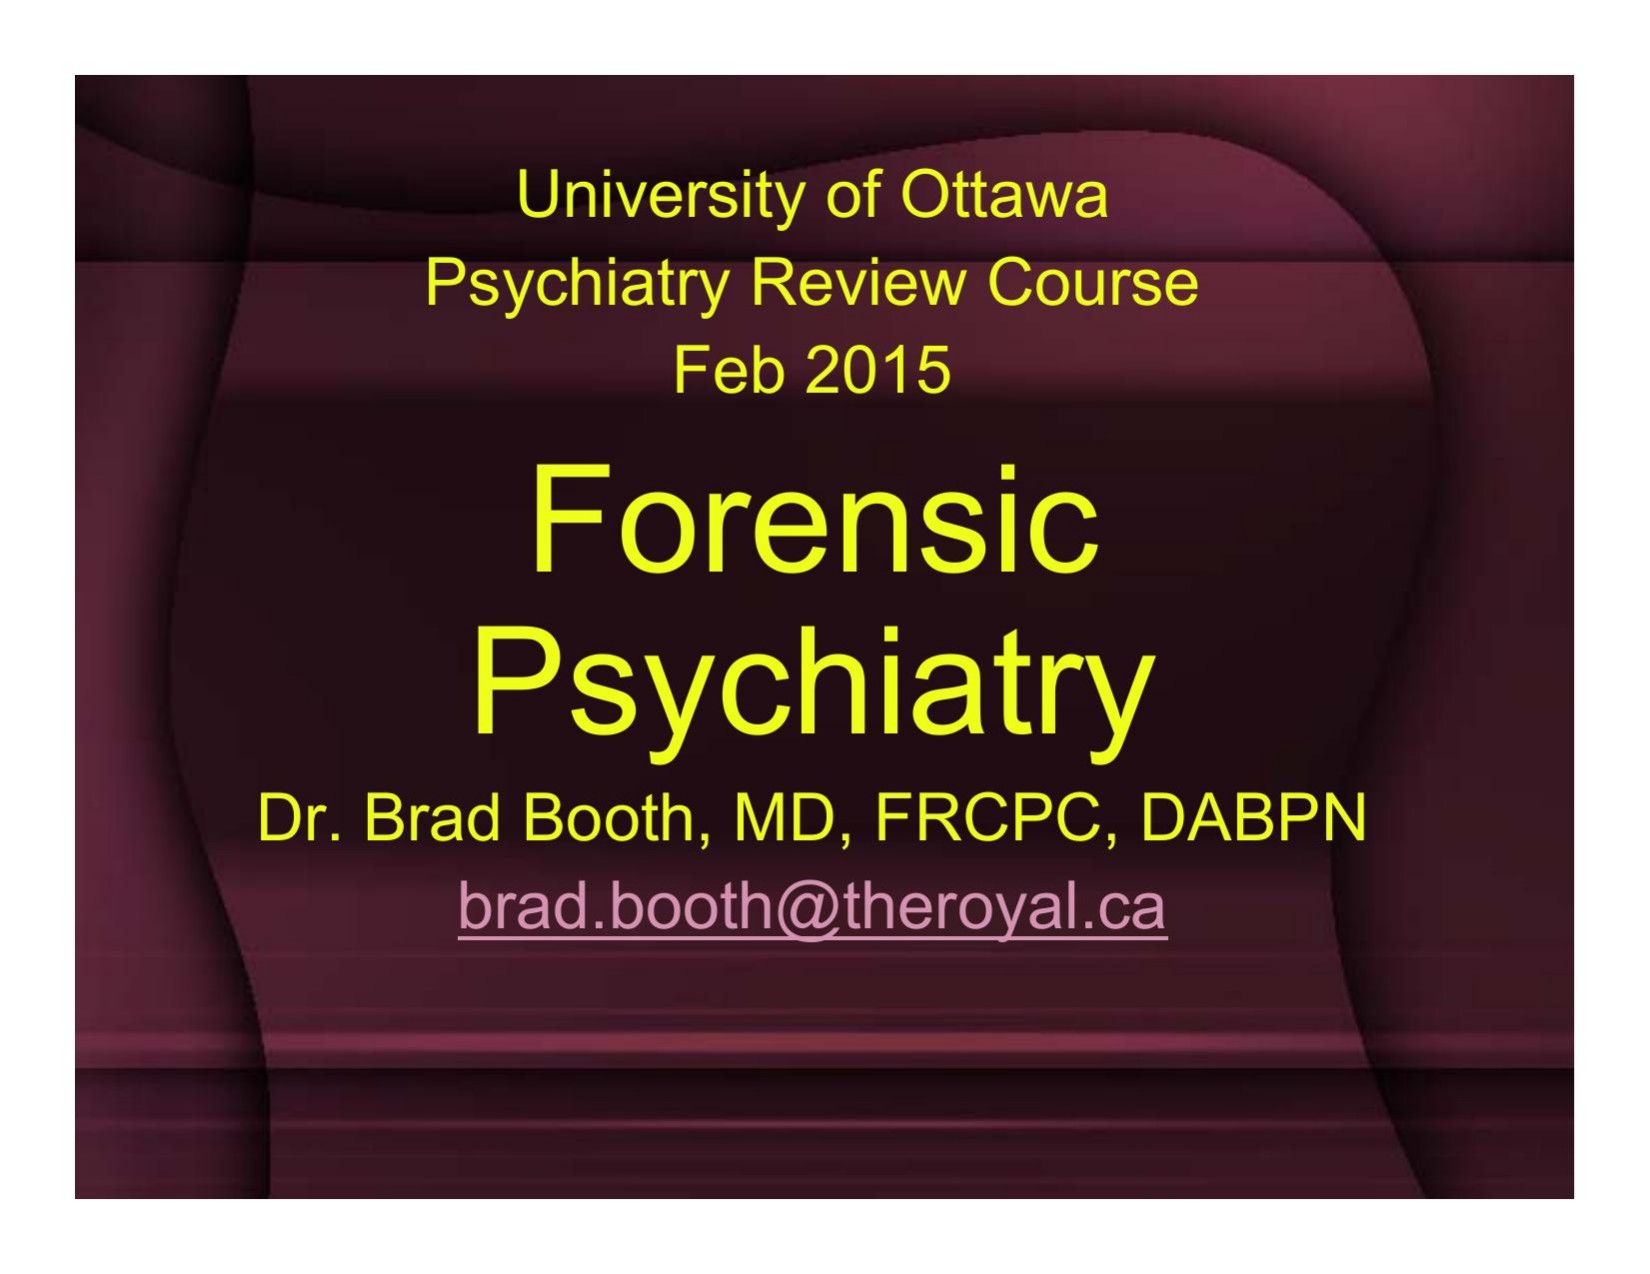 Microsoft PowerPoint - Forensic Psychiatry Review U of O 2015, B Booth handout.pptx